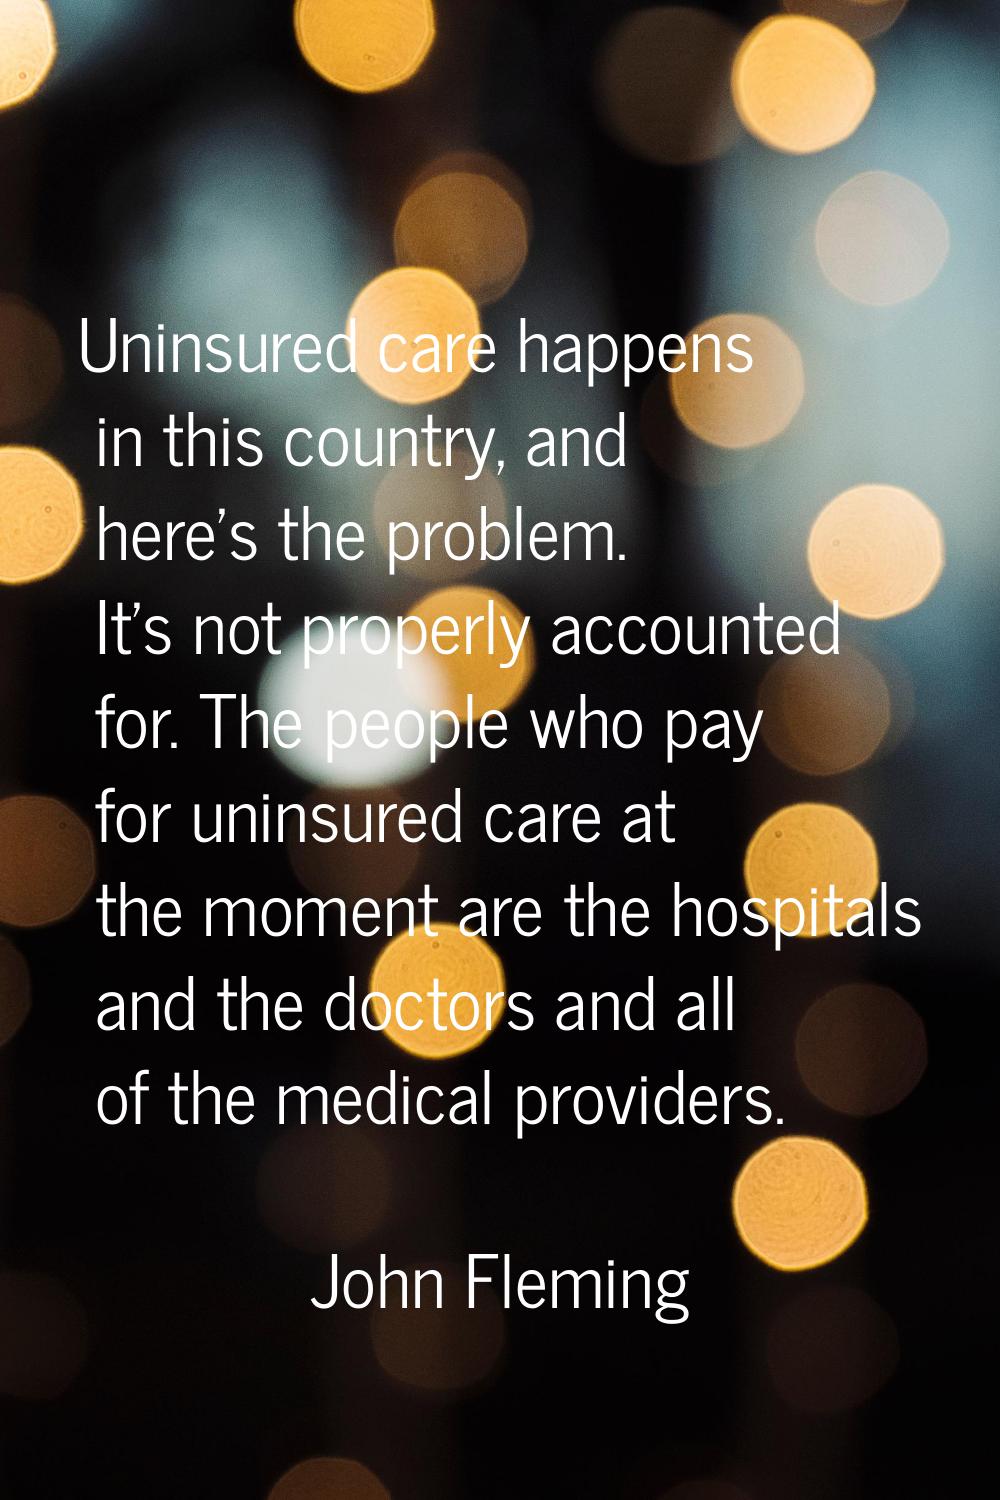 Uninsured care happens in this country, and here's the problem. It's not properly accounted for. Th